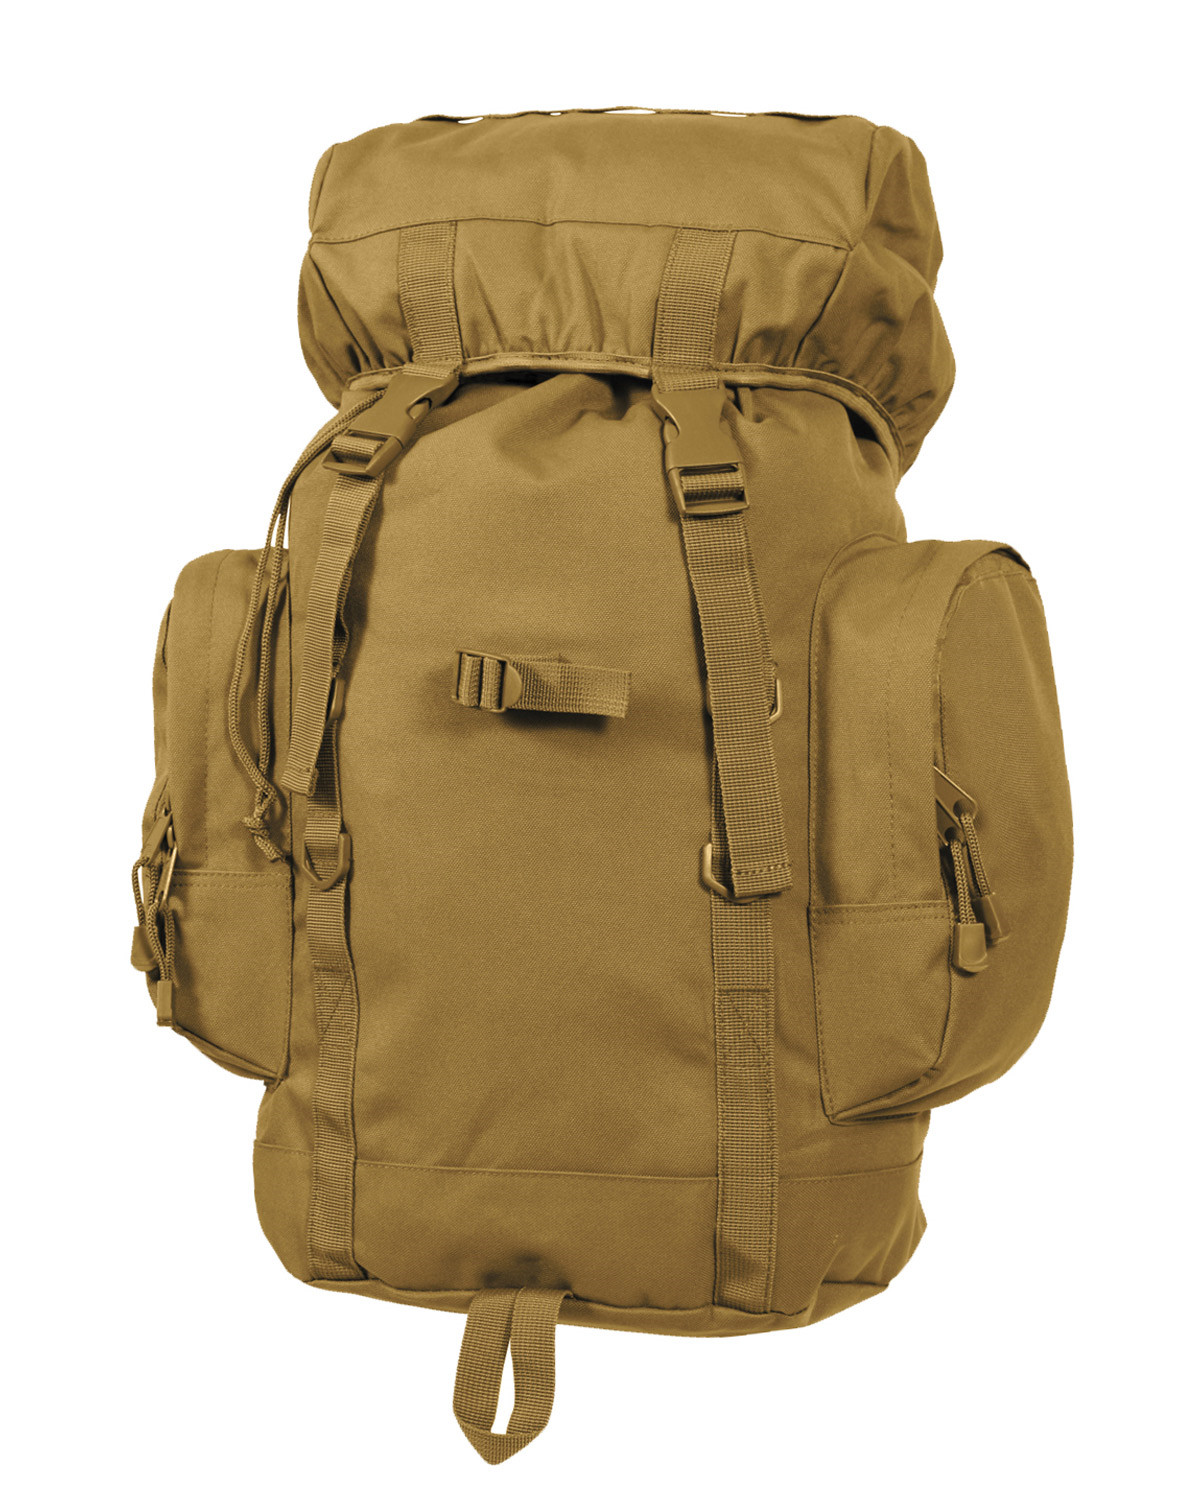 Rothco Tactical Backpack - 25 Liter (Coyote Brun, One Size)